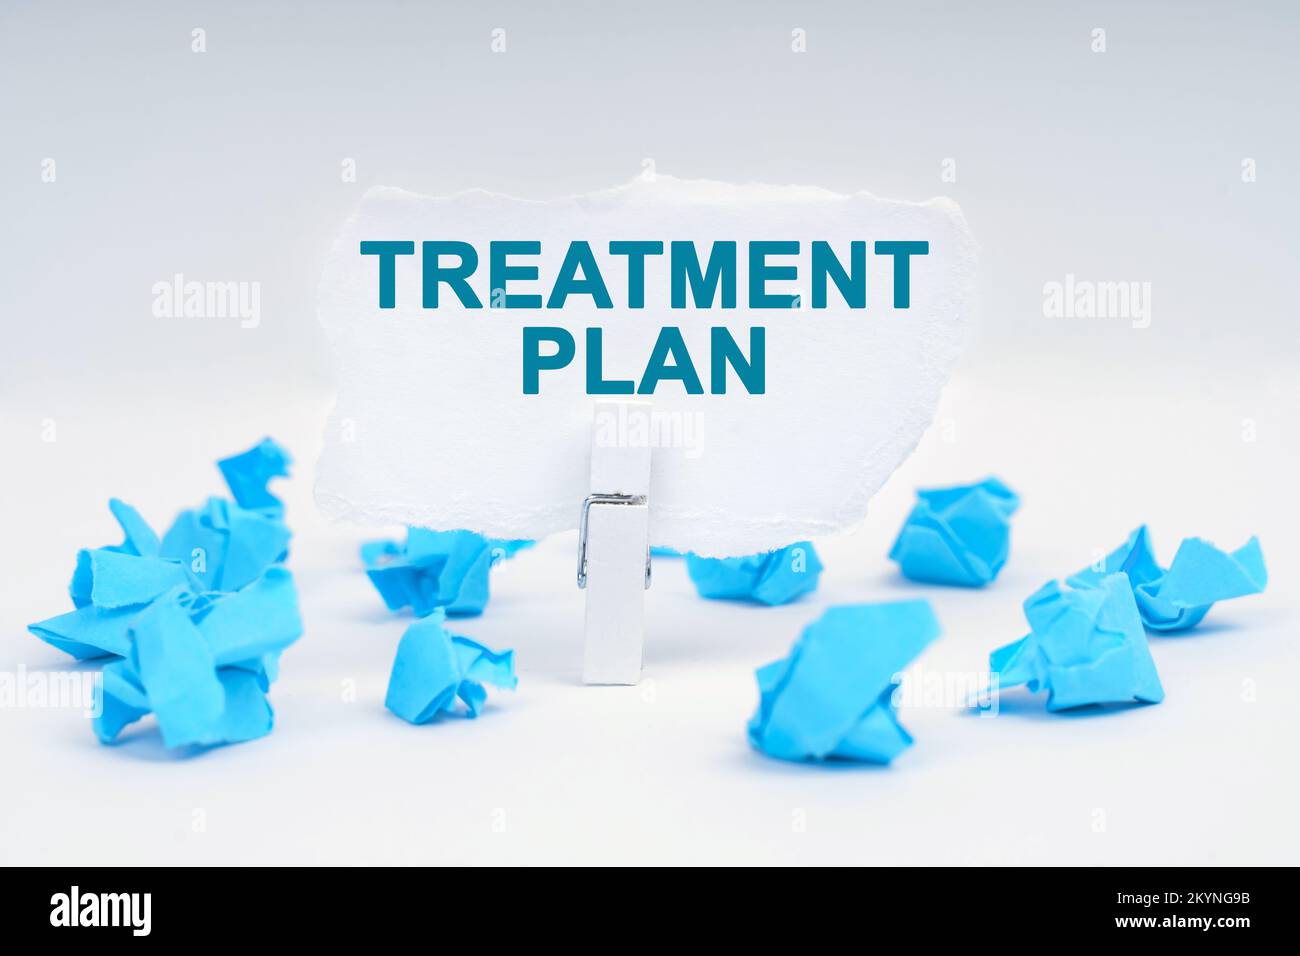 Medicine and health concept. On a white background, there are blue pieces of paper and a clothespin with paper on which it is written - TREATMENT PLAN Stock Photo